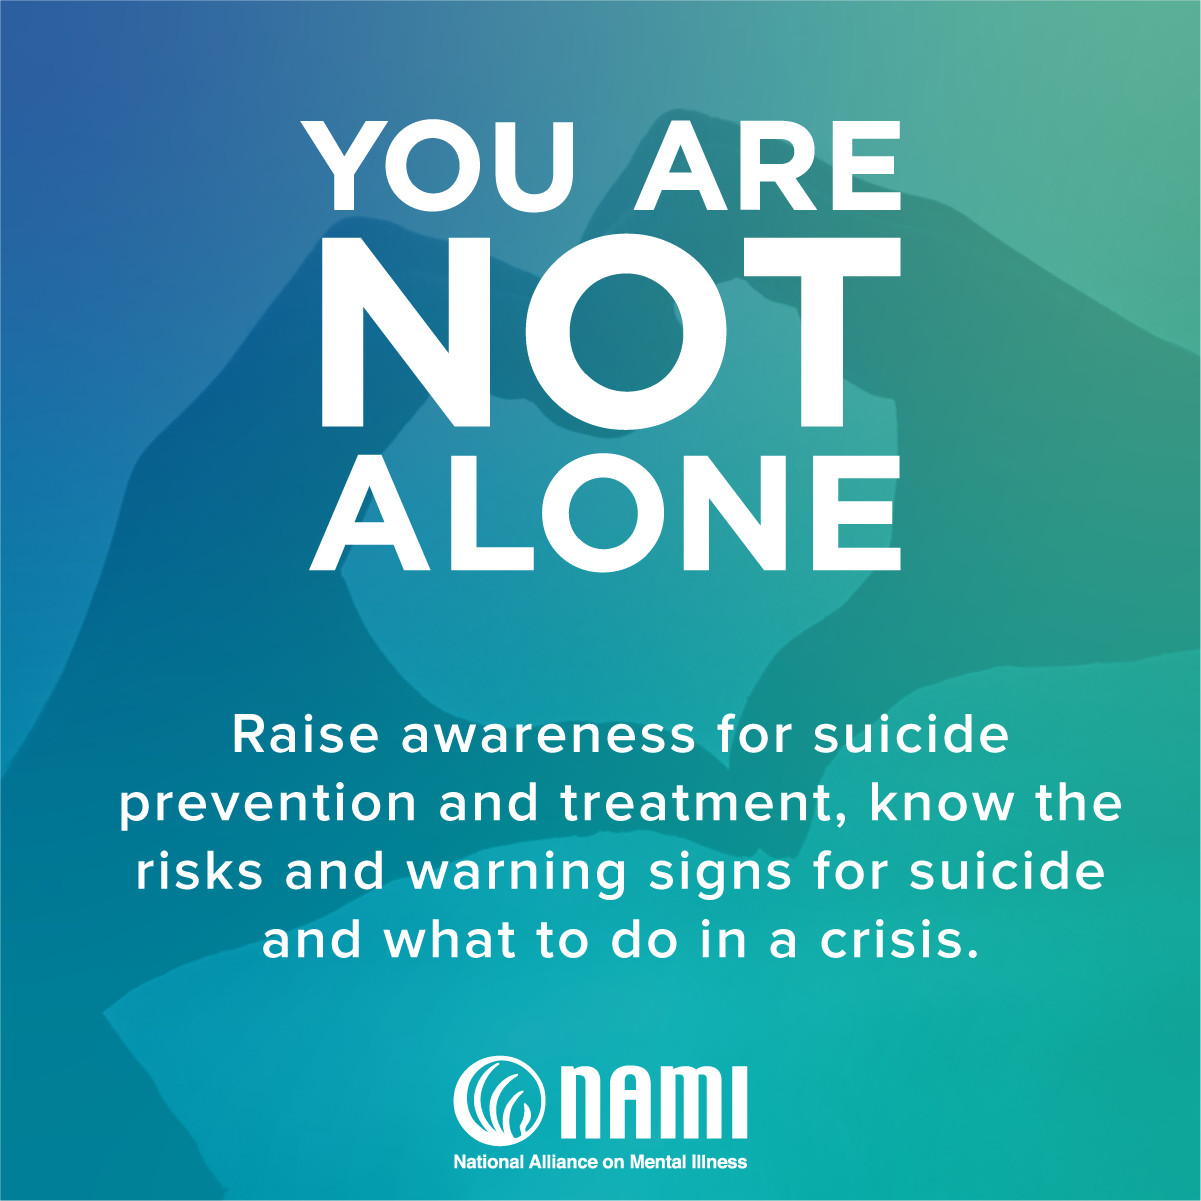 Your are not alone. Raise awareness for suicide prevention and treatment, know the risks and warning signs for suicide and what to do in a crisis.